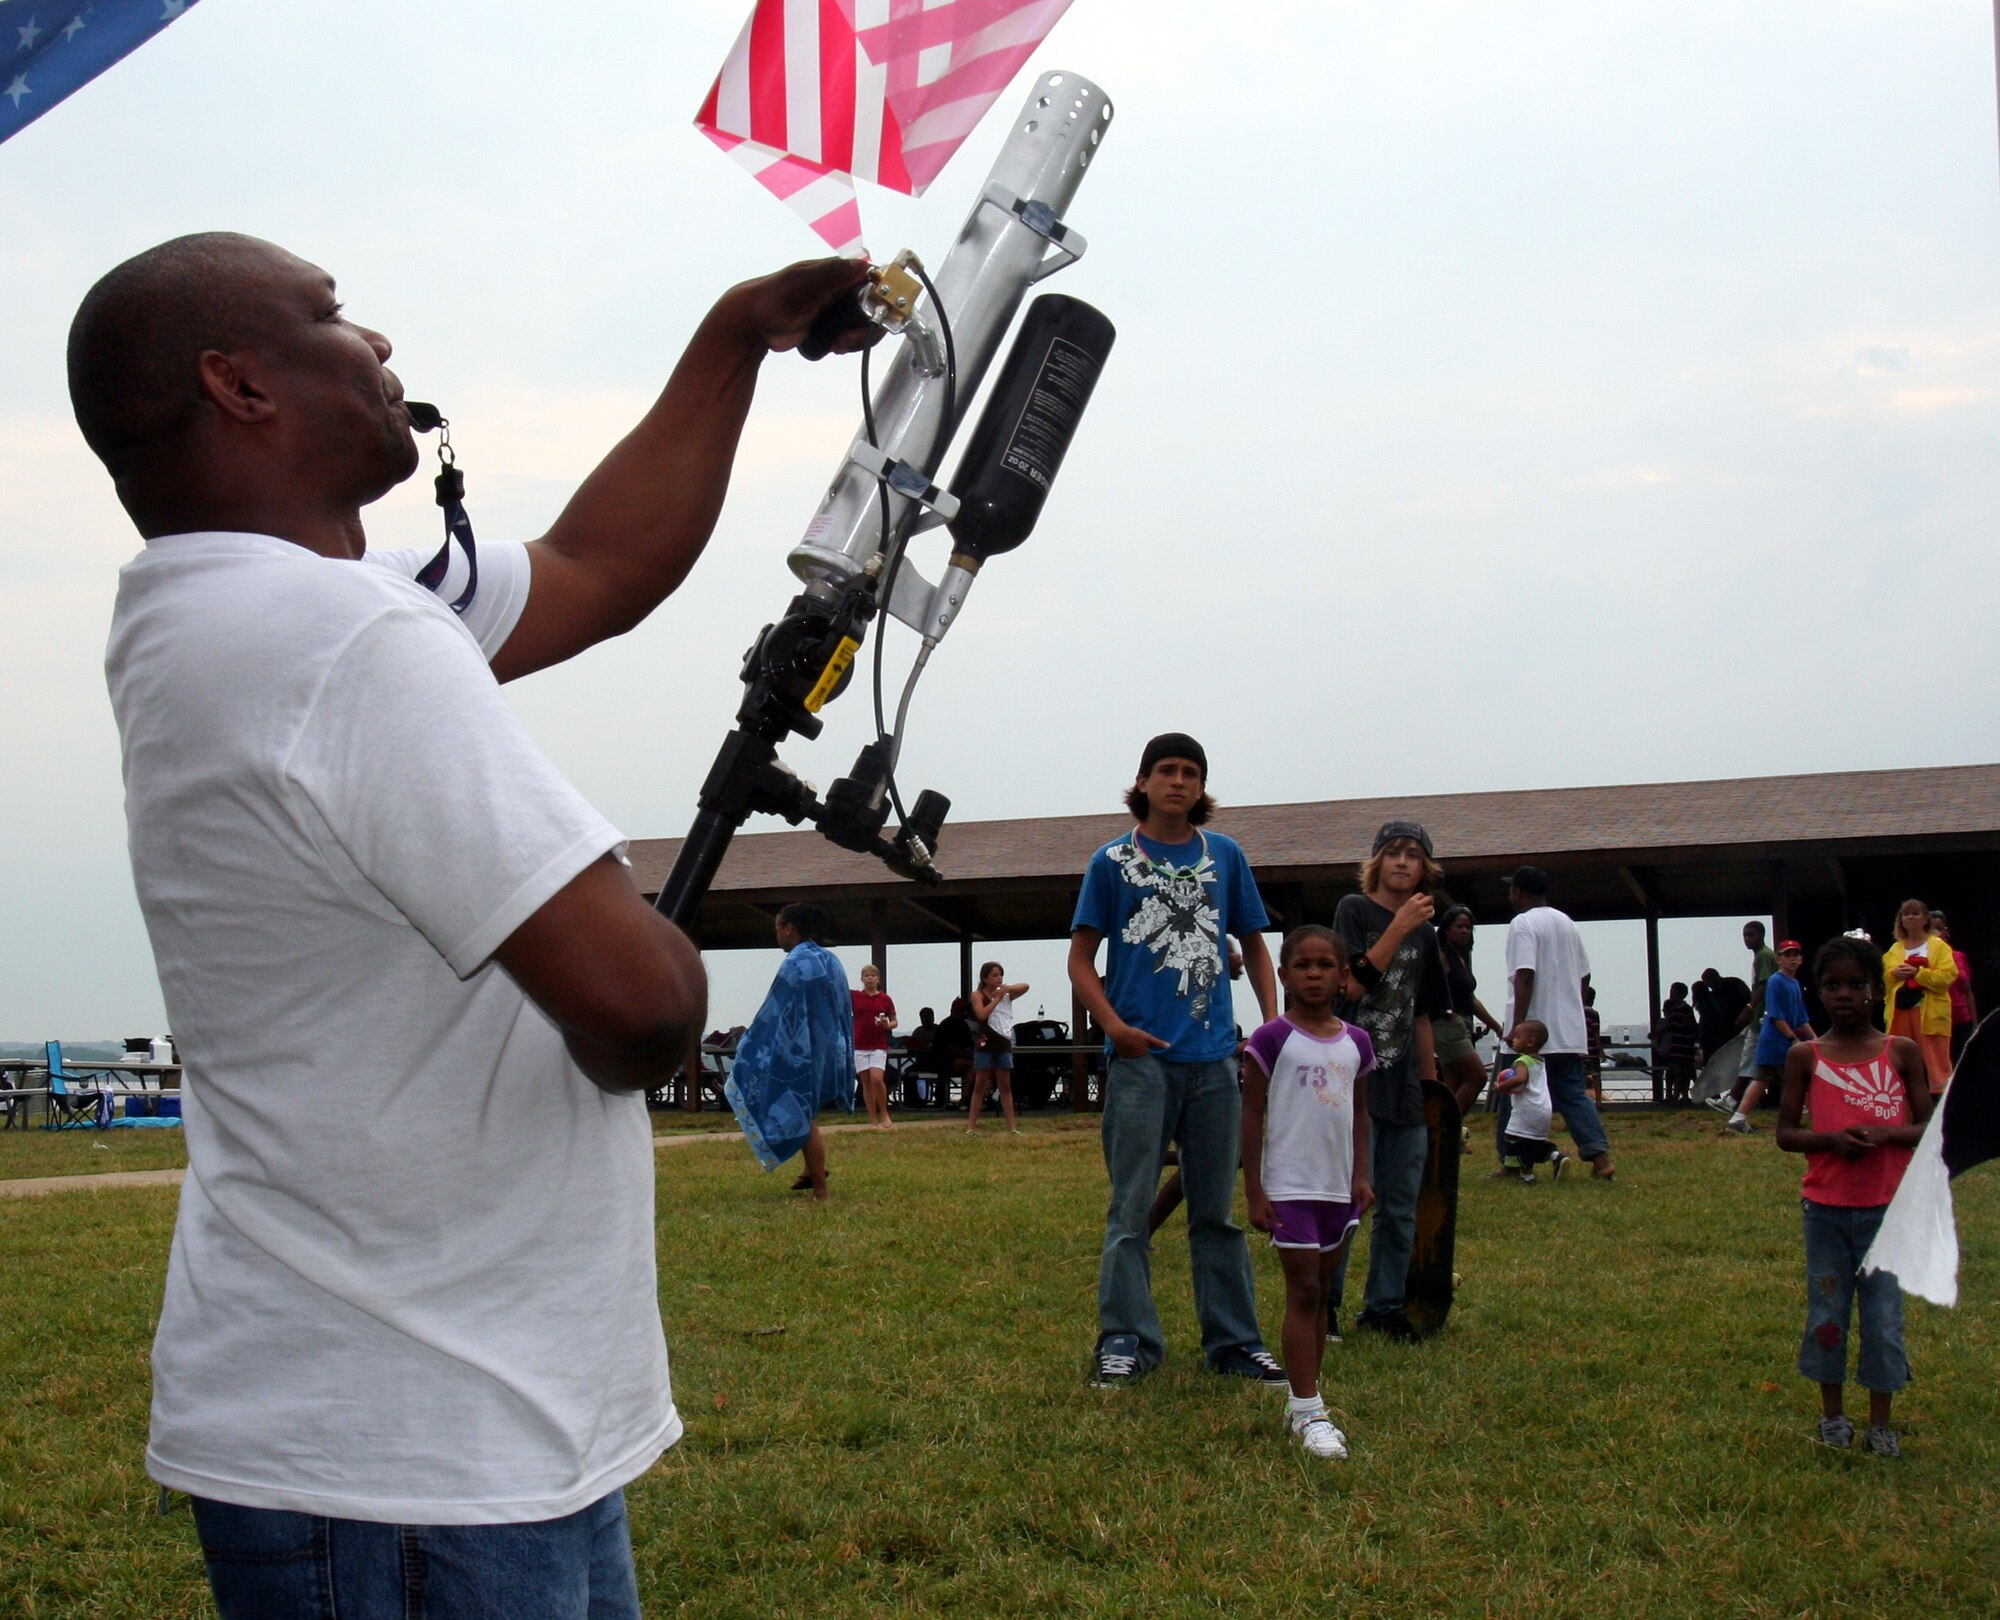 Donald "DC" Smith, 11th Services Division, uses an air cannon to launch a prize in the crowd July 4 during the 6th Annual Freedom Fest at Bolling Green Park. (U.S. Air Force photo by George Scott)